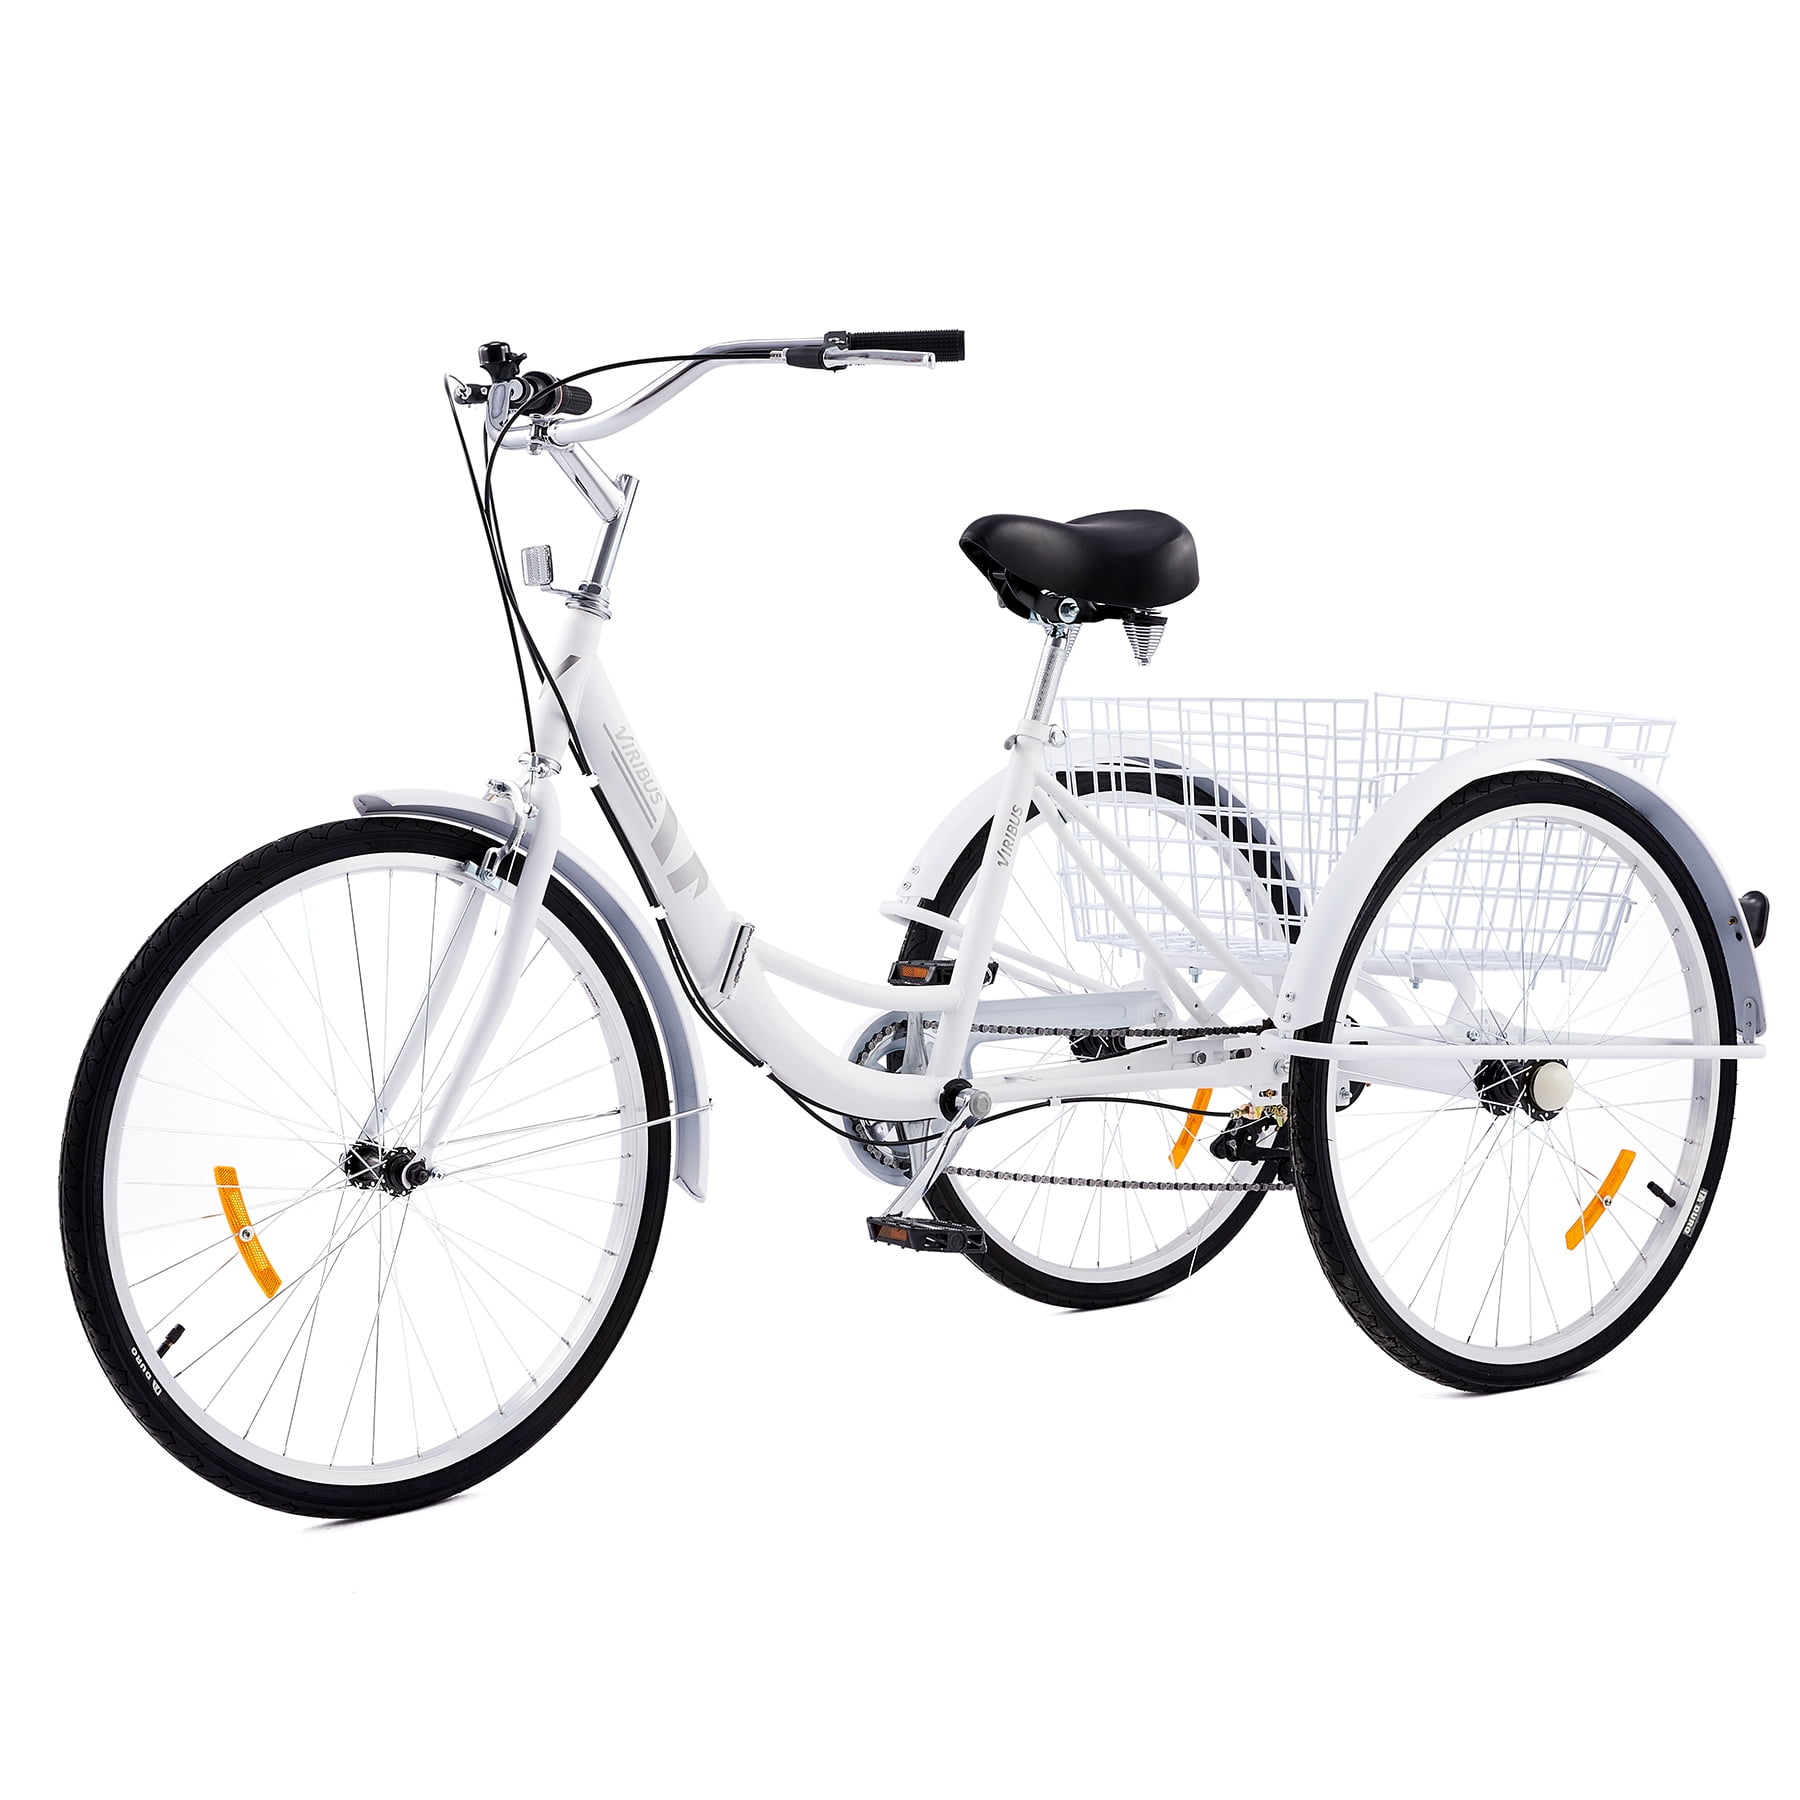 Details about  / Mantis Tri-Rad Adult Fold Tricycle Bike Bicycle Portable Tricycle 20/" Wheels US